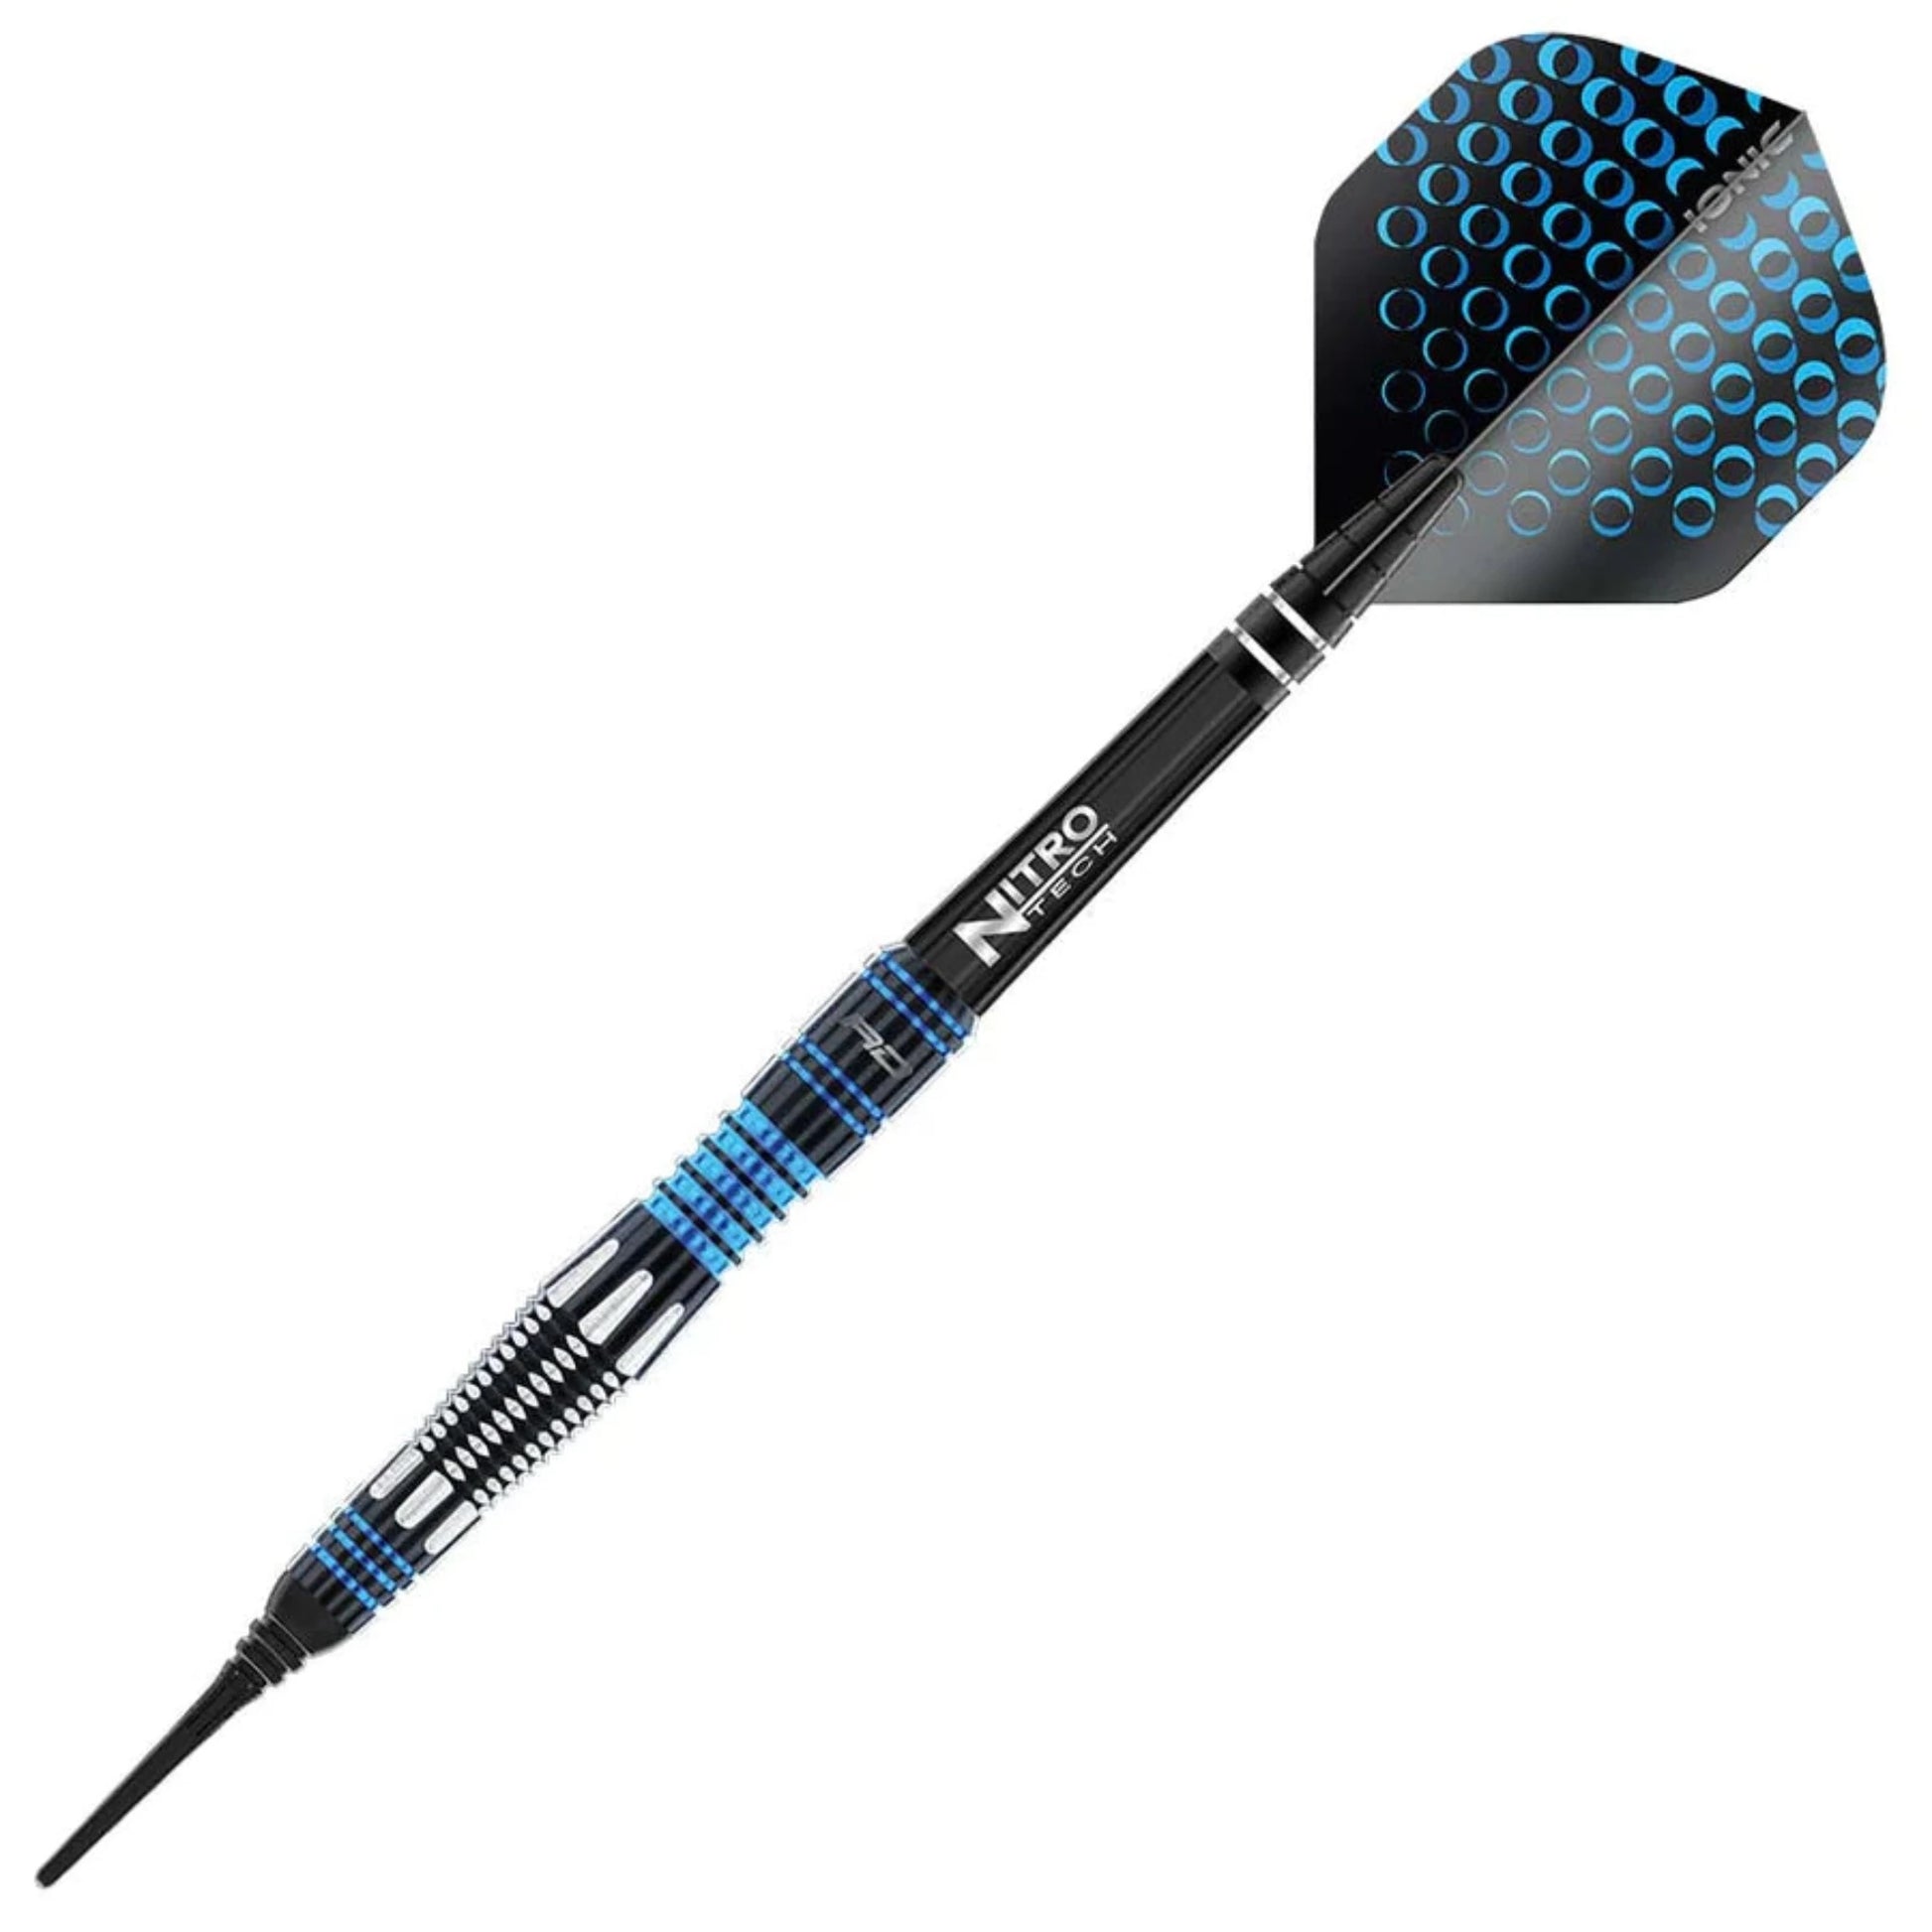 A single dart from the Red Dragon Marlin Soft Tip Dart Set. The dart is prominently black, with blue and silver accents throughout the barrel, shaft, and flight. The knurling on the barrel is sky blue. The flight features a blue circle pattern.